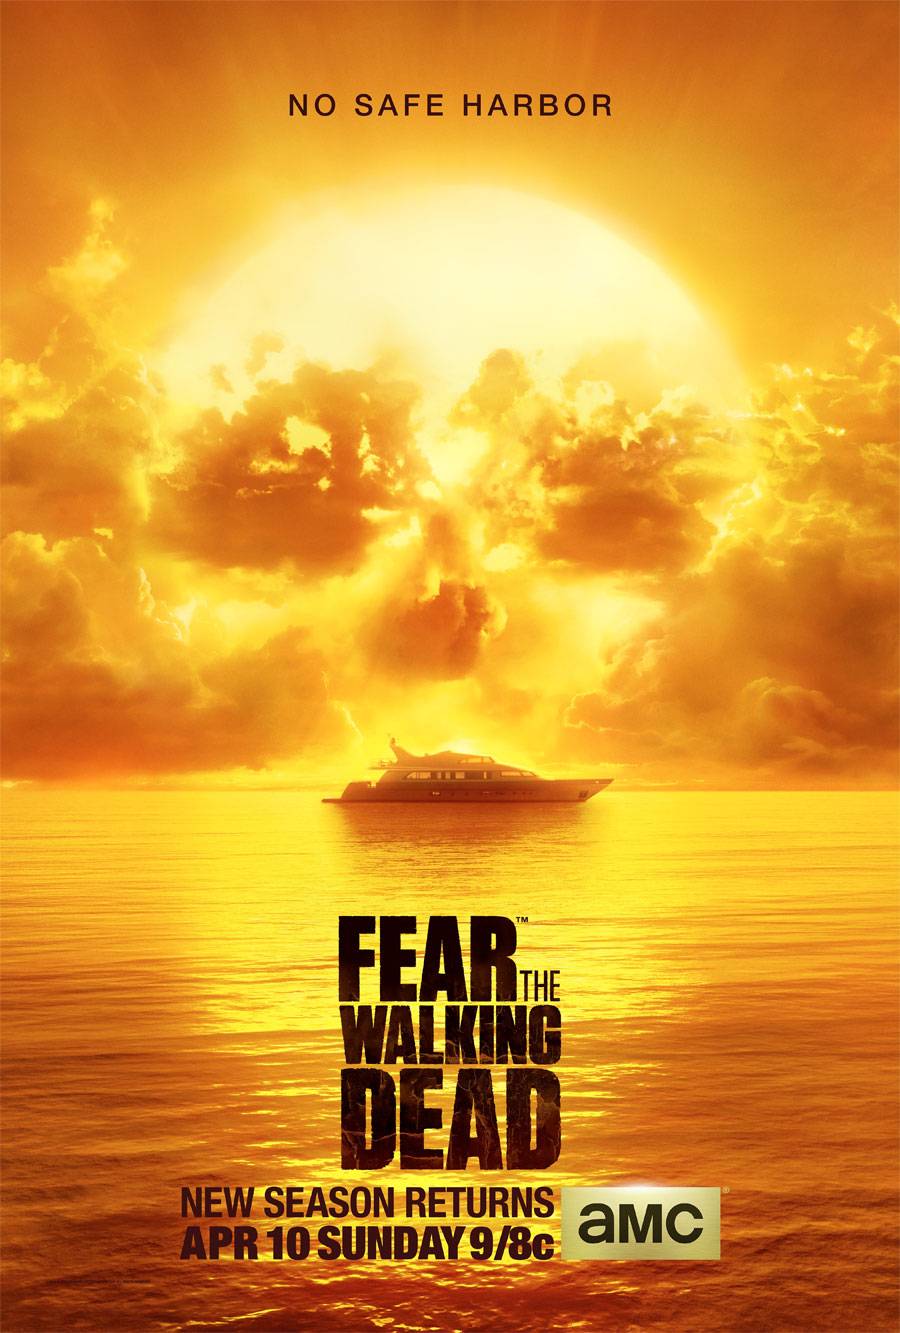 Fear the Walking Dead Promises No Safe Harbor in Season 2 Poster